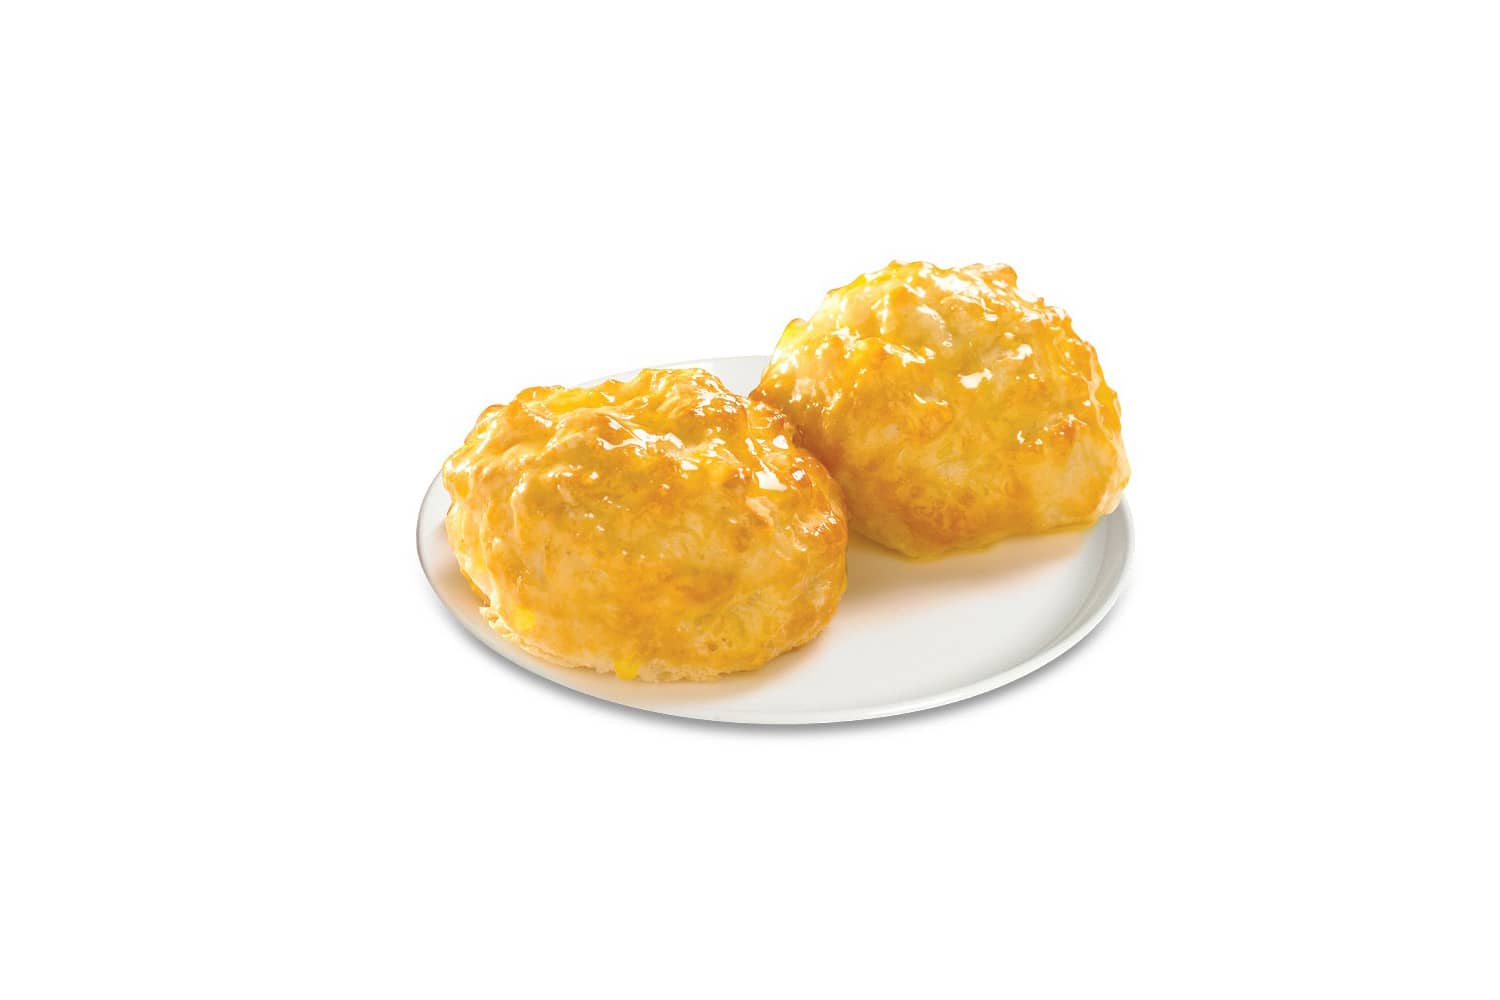 1-for-1 Honey Butter Biscuit at Texas Chicken - Get Deals, Cashback and Rewards with ShopBack GO